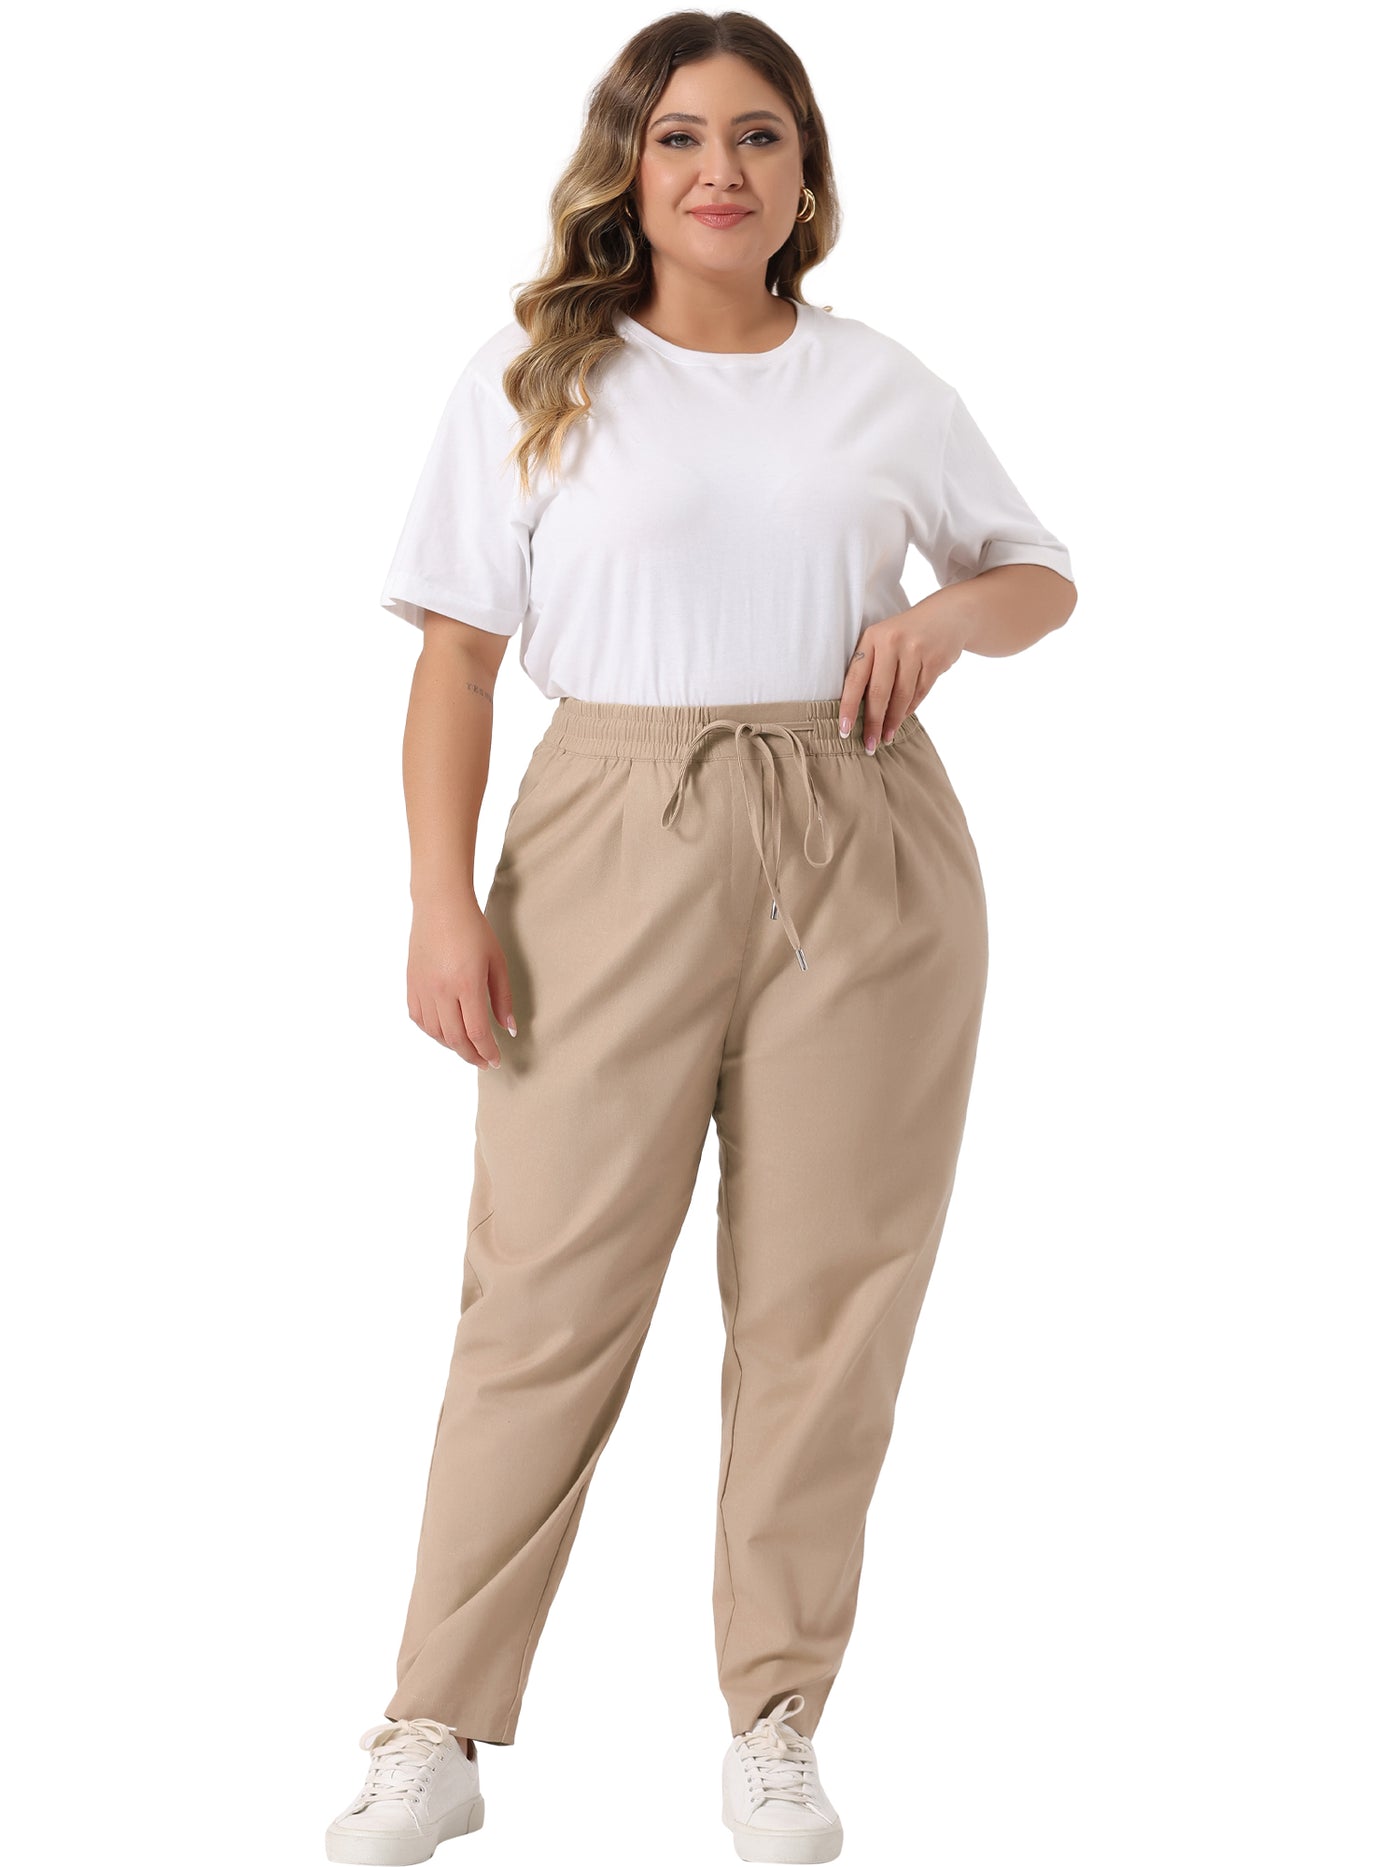 Bublédon Plus Size Pants for Women Straight Leg Drawstring Elastic Loose Comfy Trousers with Pockets